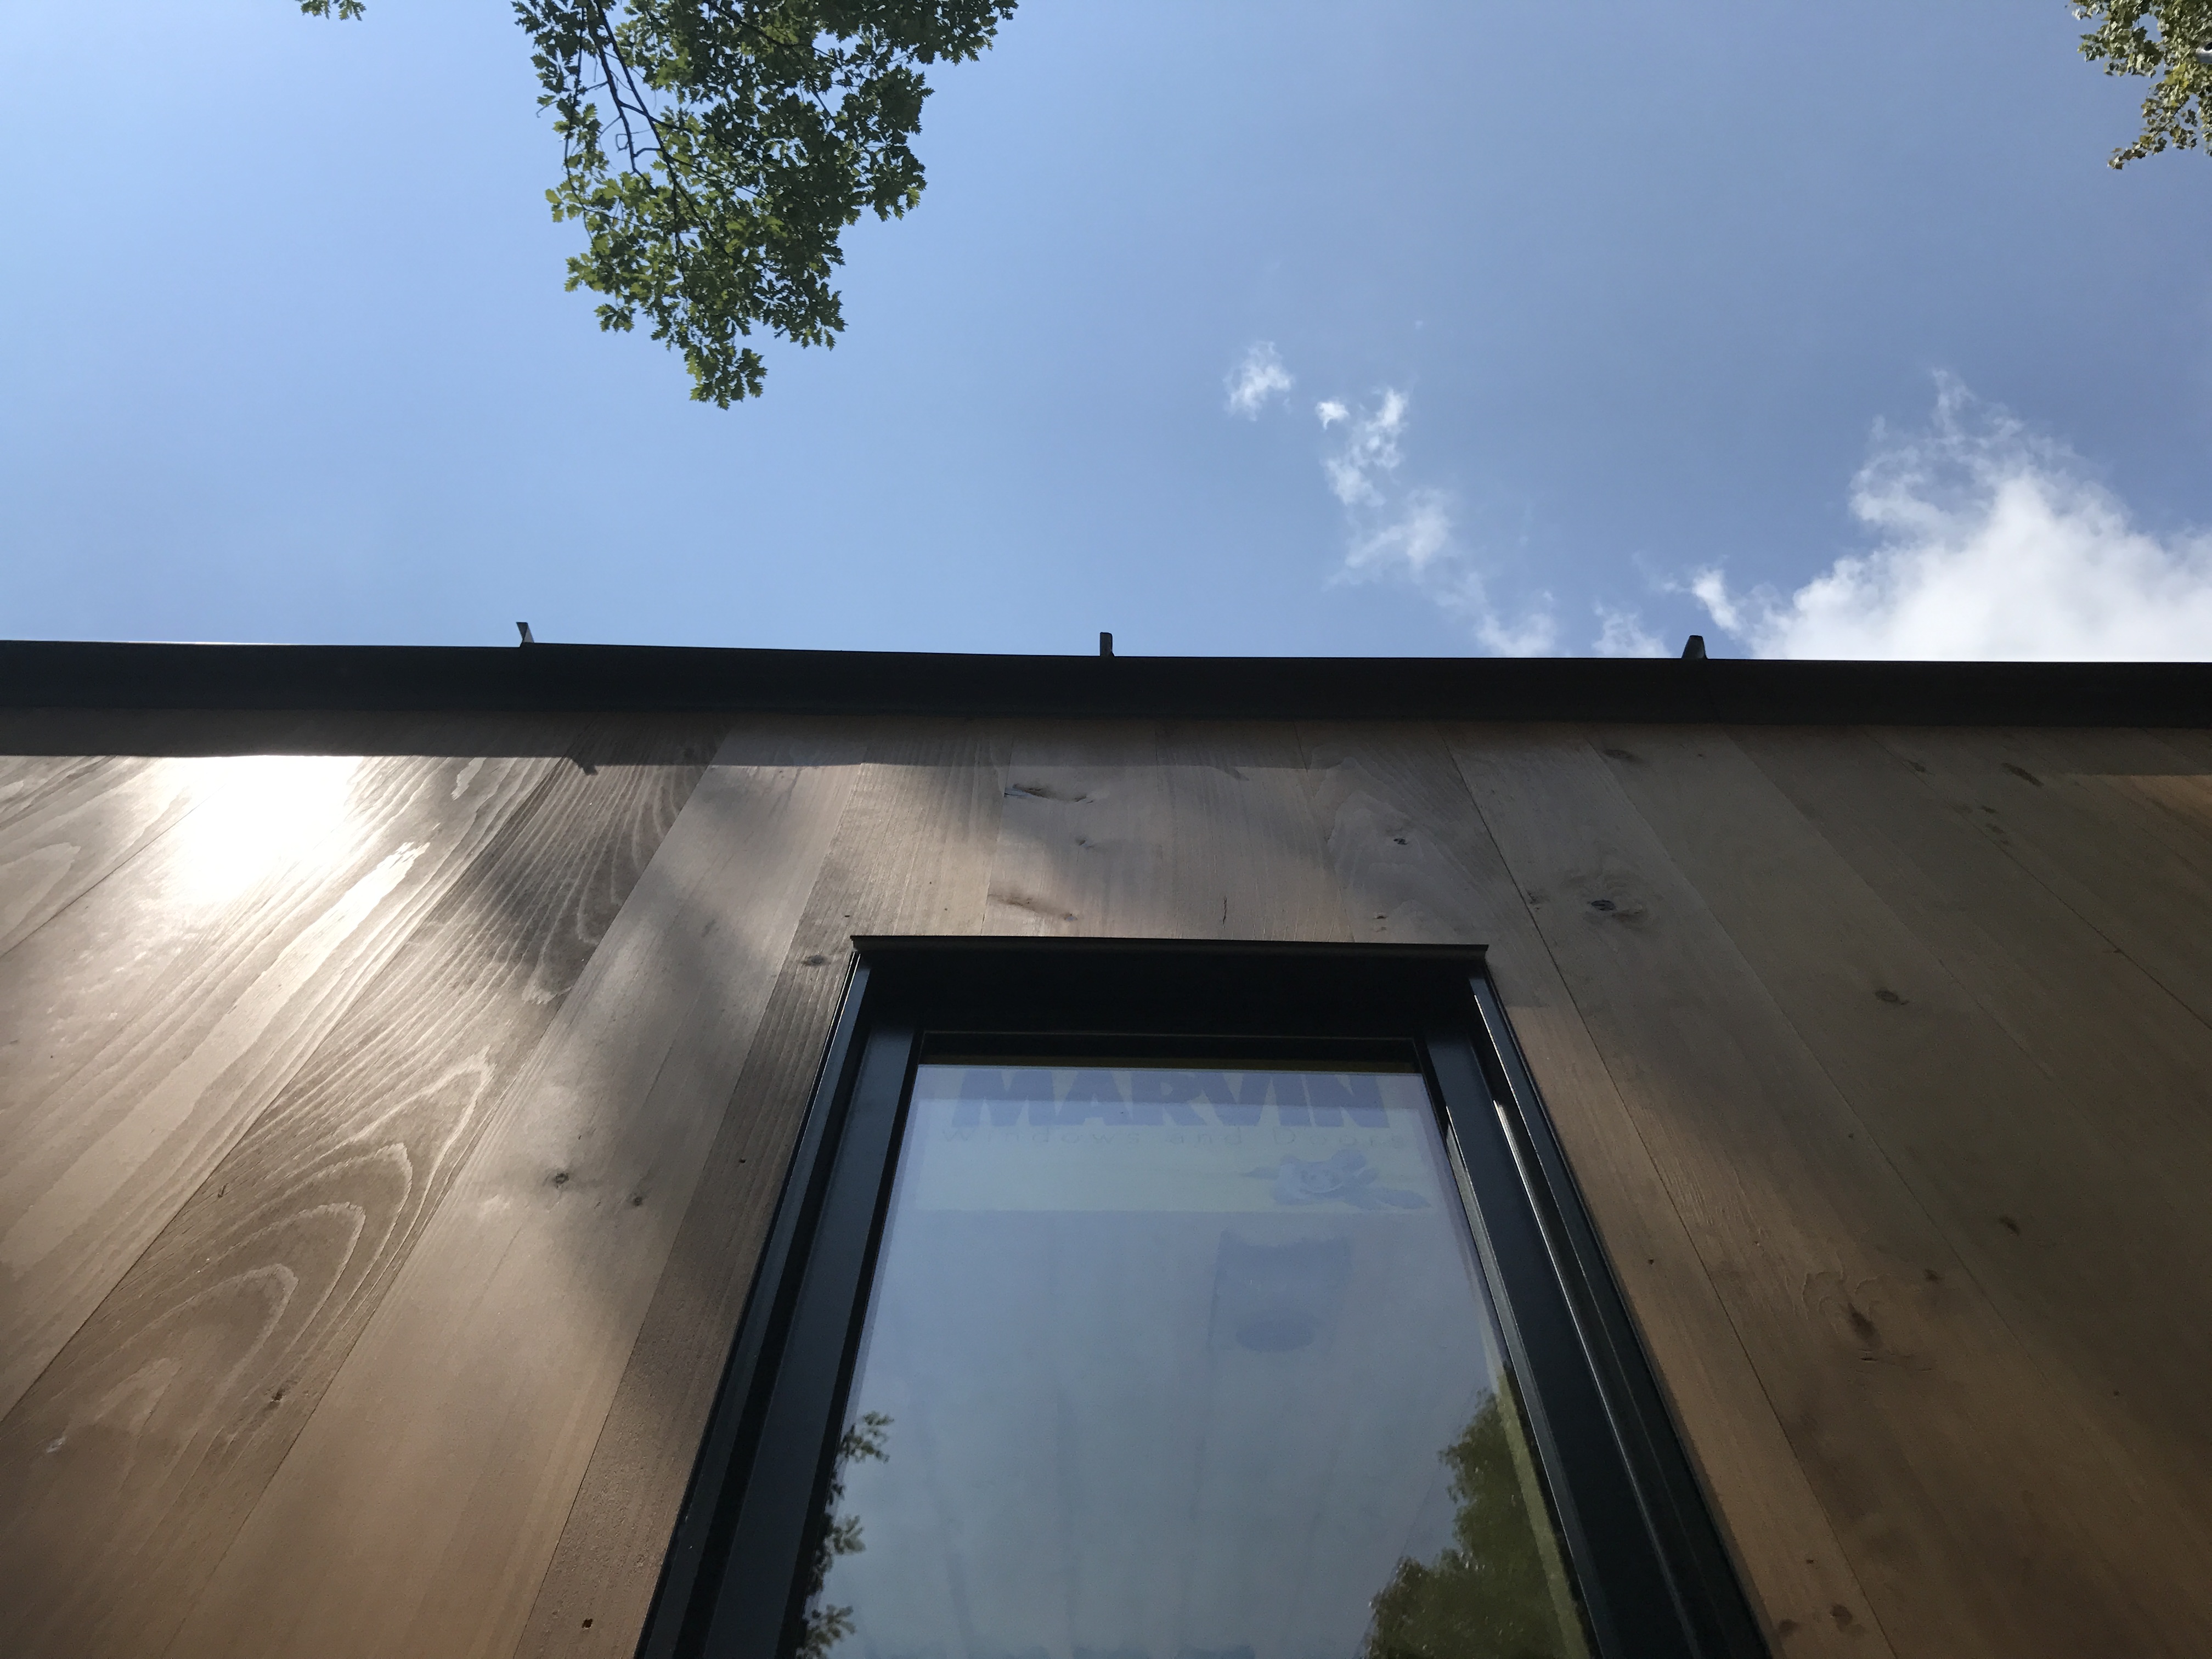 Chalet Perche Under Construction - A Modern Home in the Hudson Valley